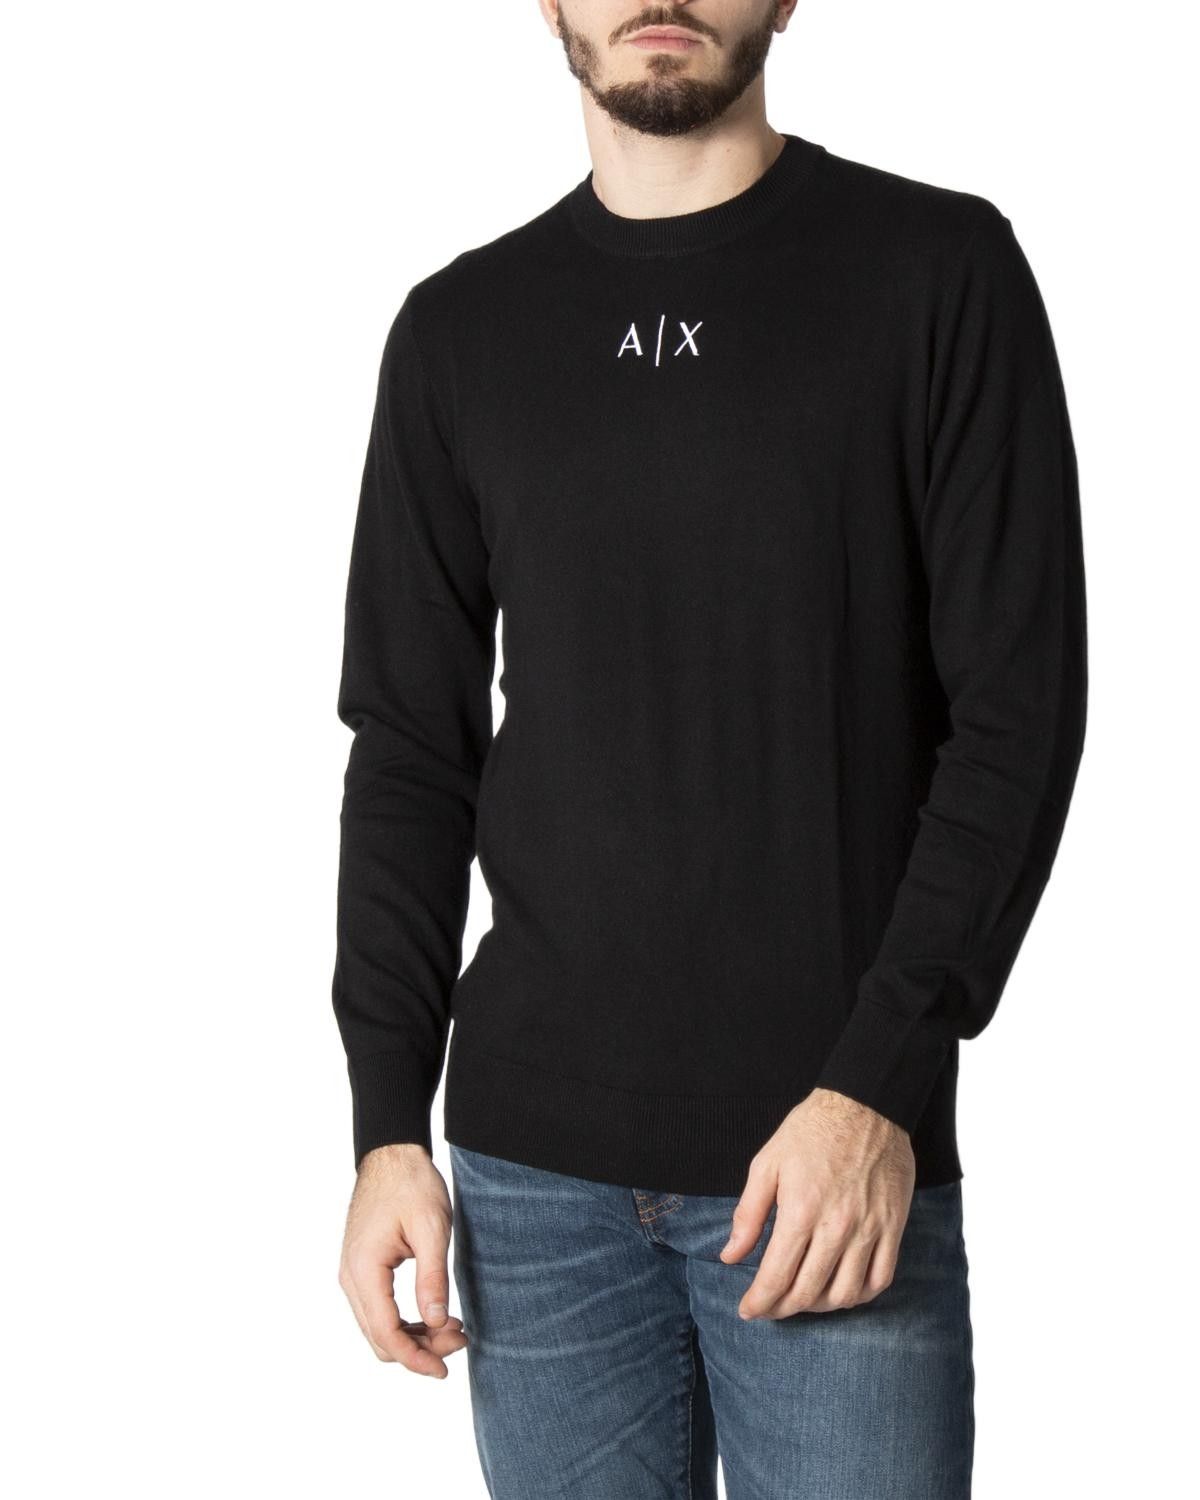 Brand: Armani Exchange
Gender: Men
Type: Knitwear
Season: Fall/Winter

PRODUCT DETAIL
• Color: black
• Pattern: plain
• Sleeves: long
• Neckline: round neck

COMPOSITION AND MATERIAL
• Composition: -53% cotton -5% silk -42% viscose 
•  Washing: machine wash at 30°